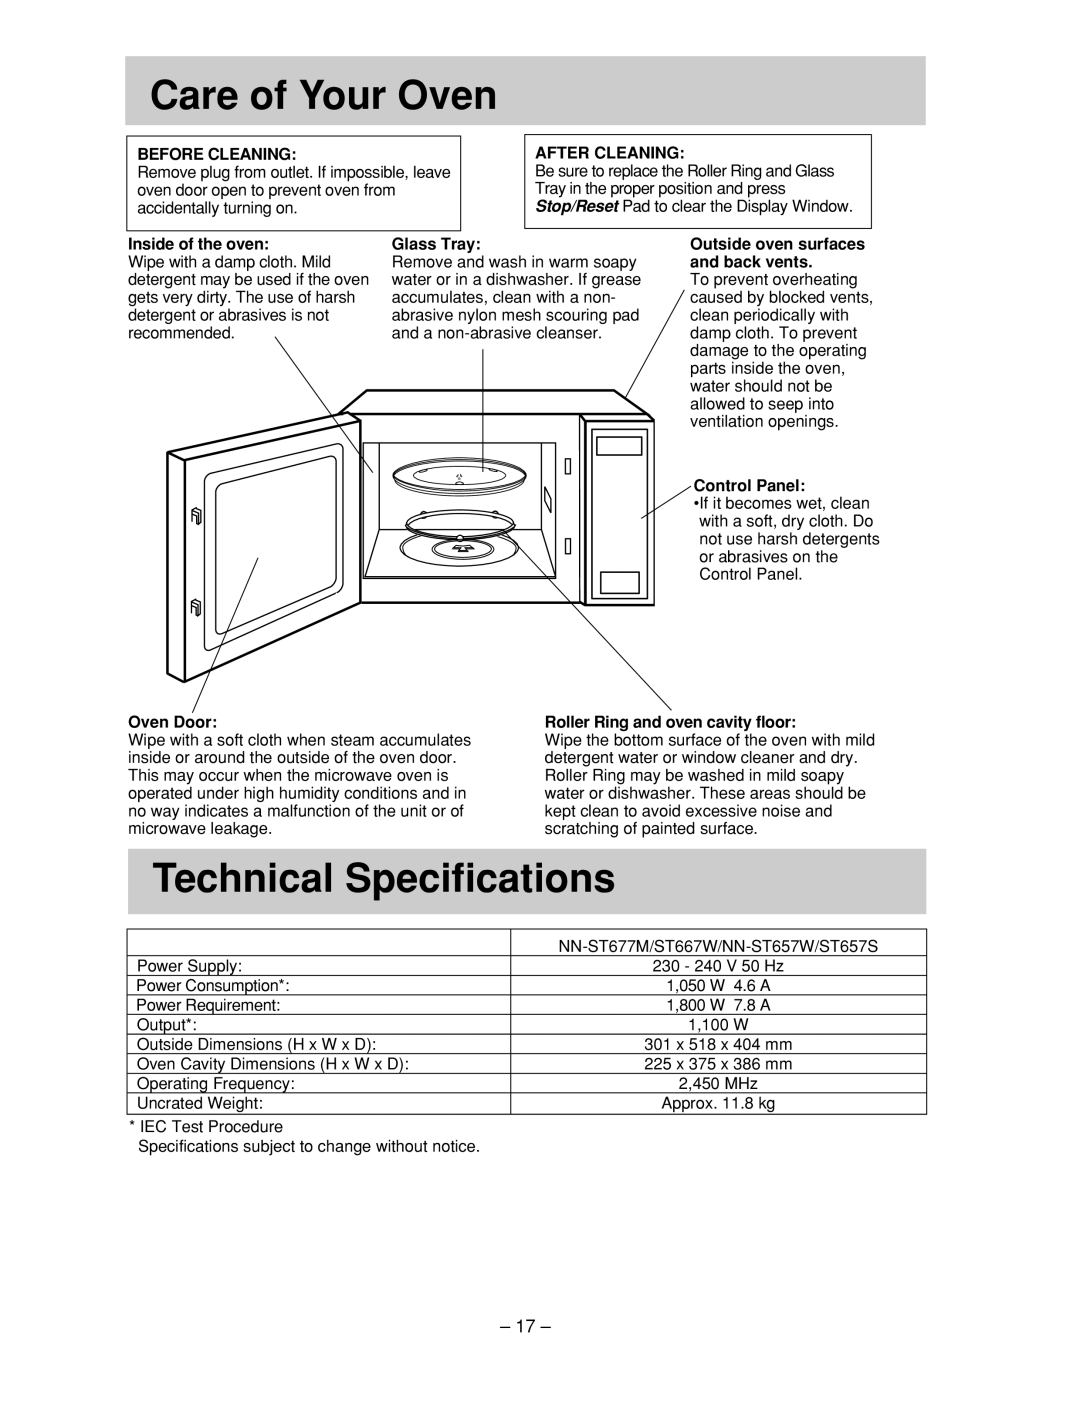 Panasonic NN-ST657S, NN-ST677M, NN-ST667W, NN-ST657 W manual Technical Specifications, Care of Your Oven, 17 